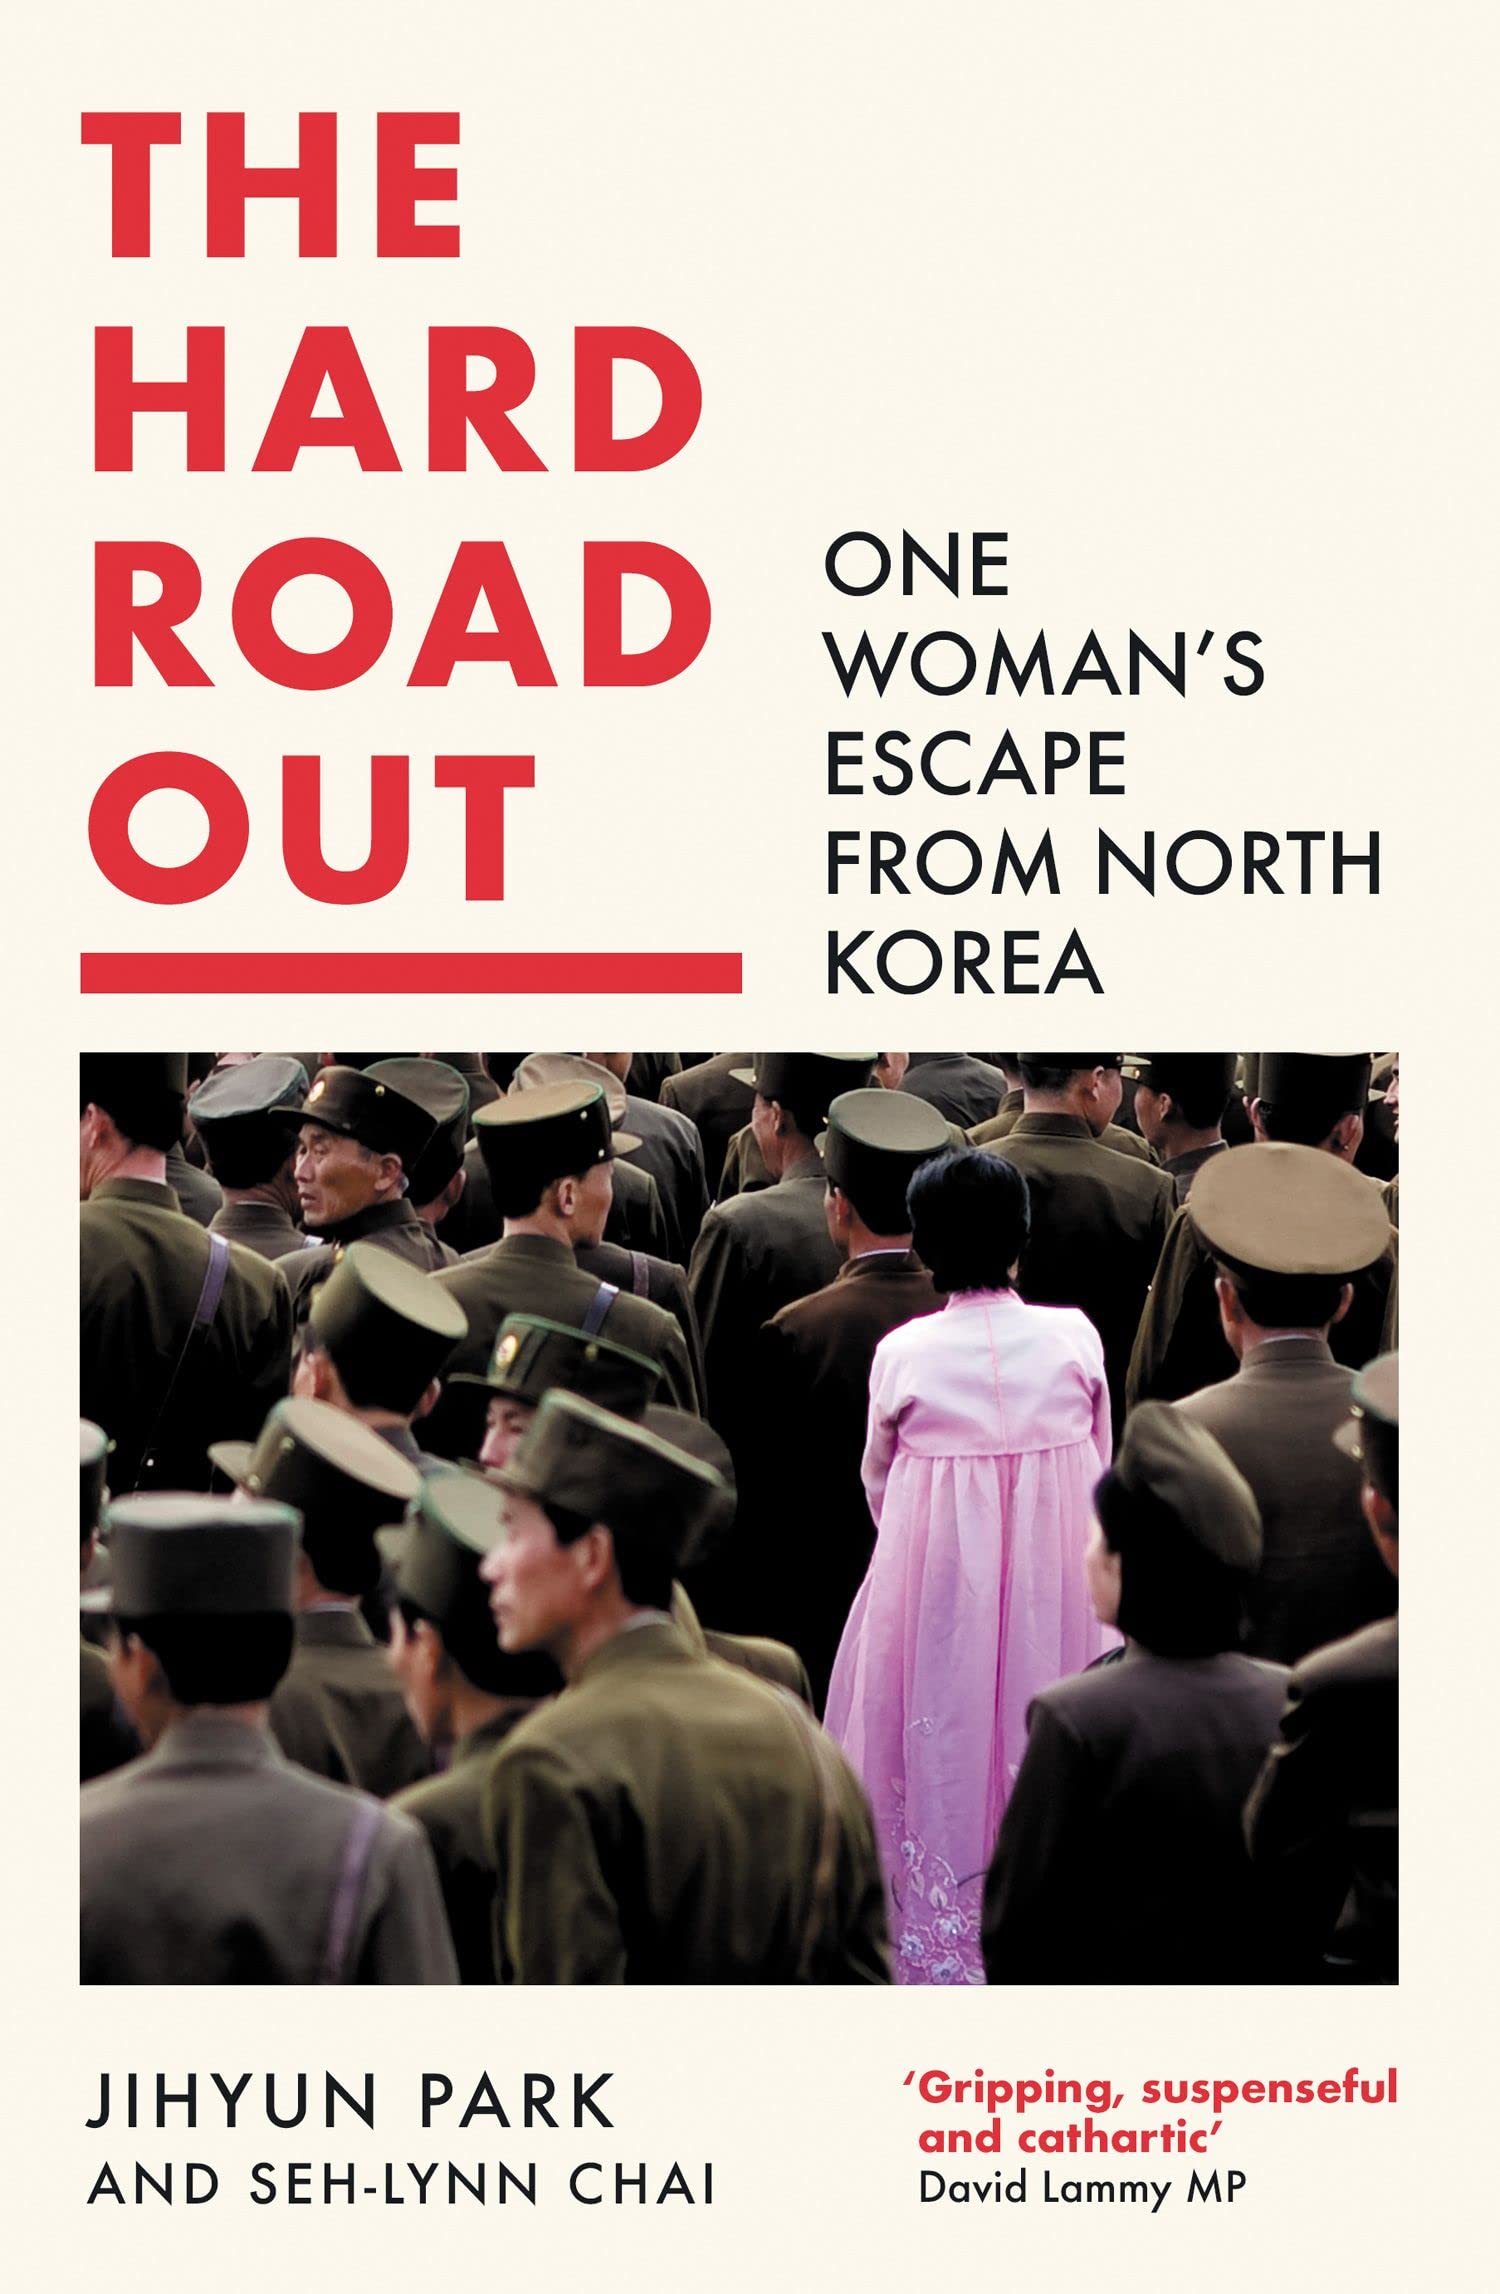 The Hard Road Out: One Woman's Escape From North Korea